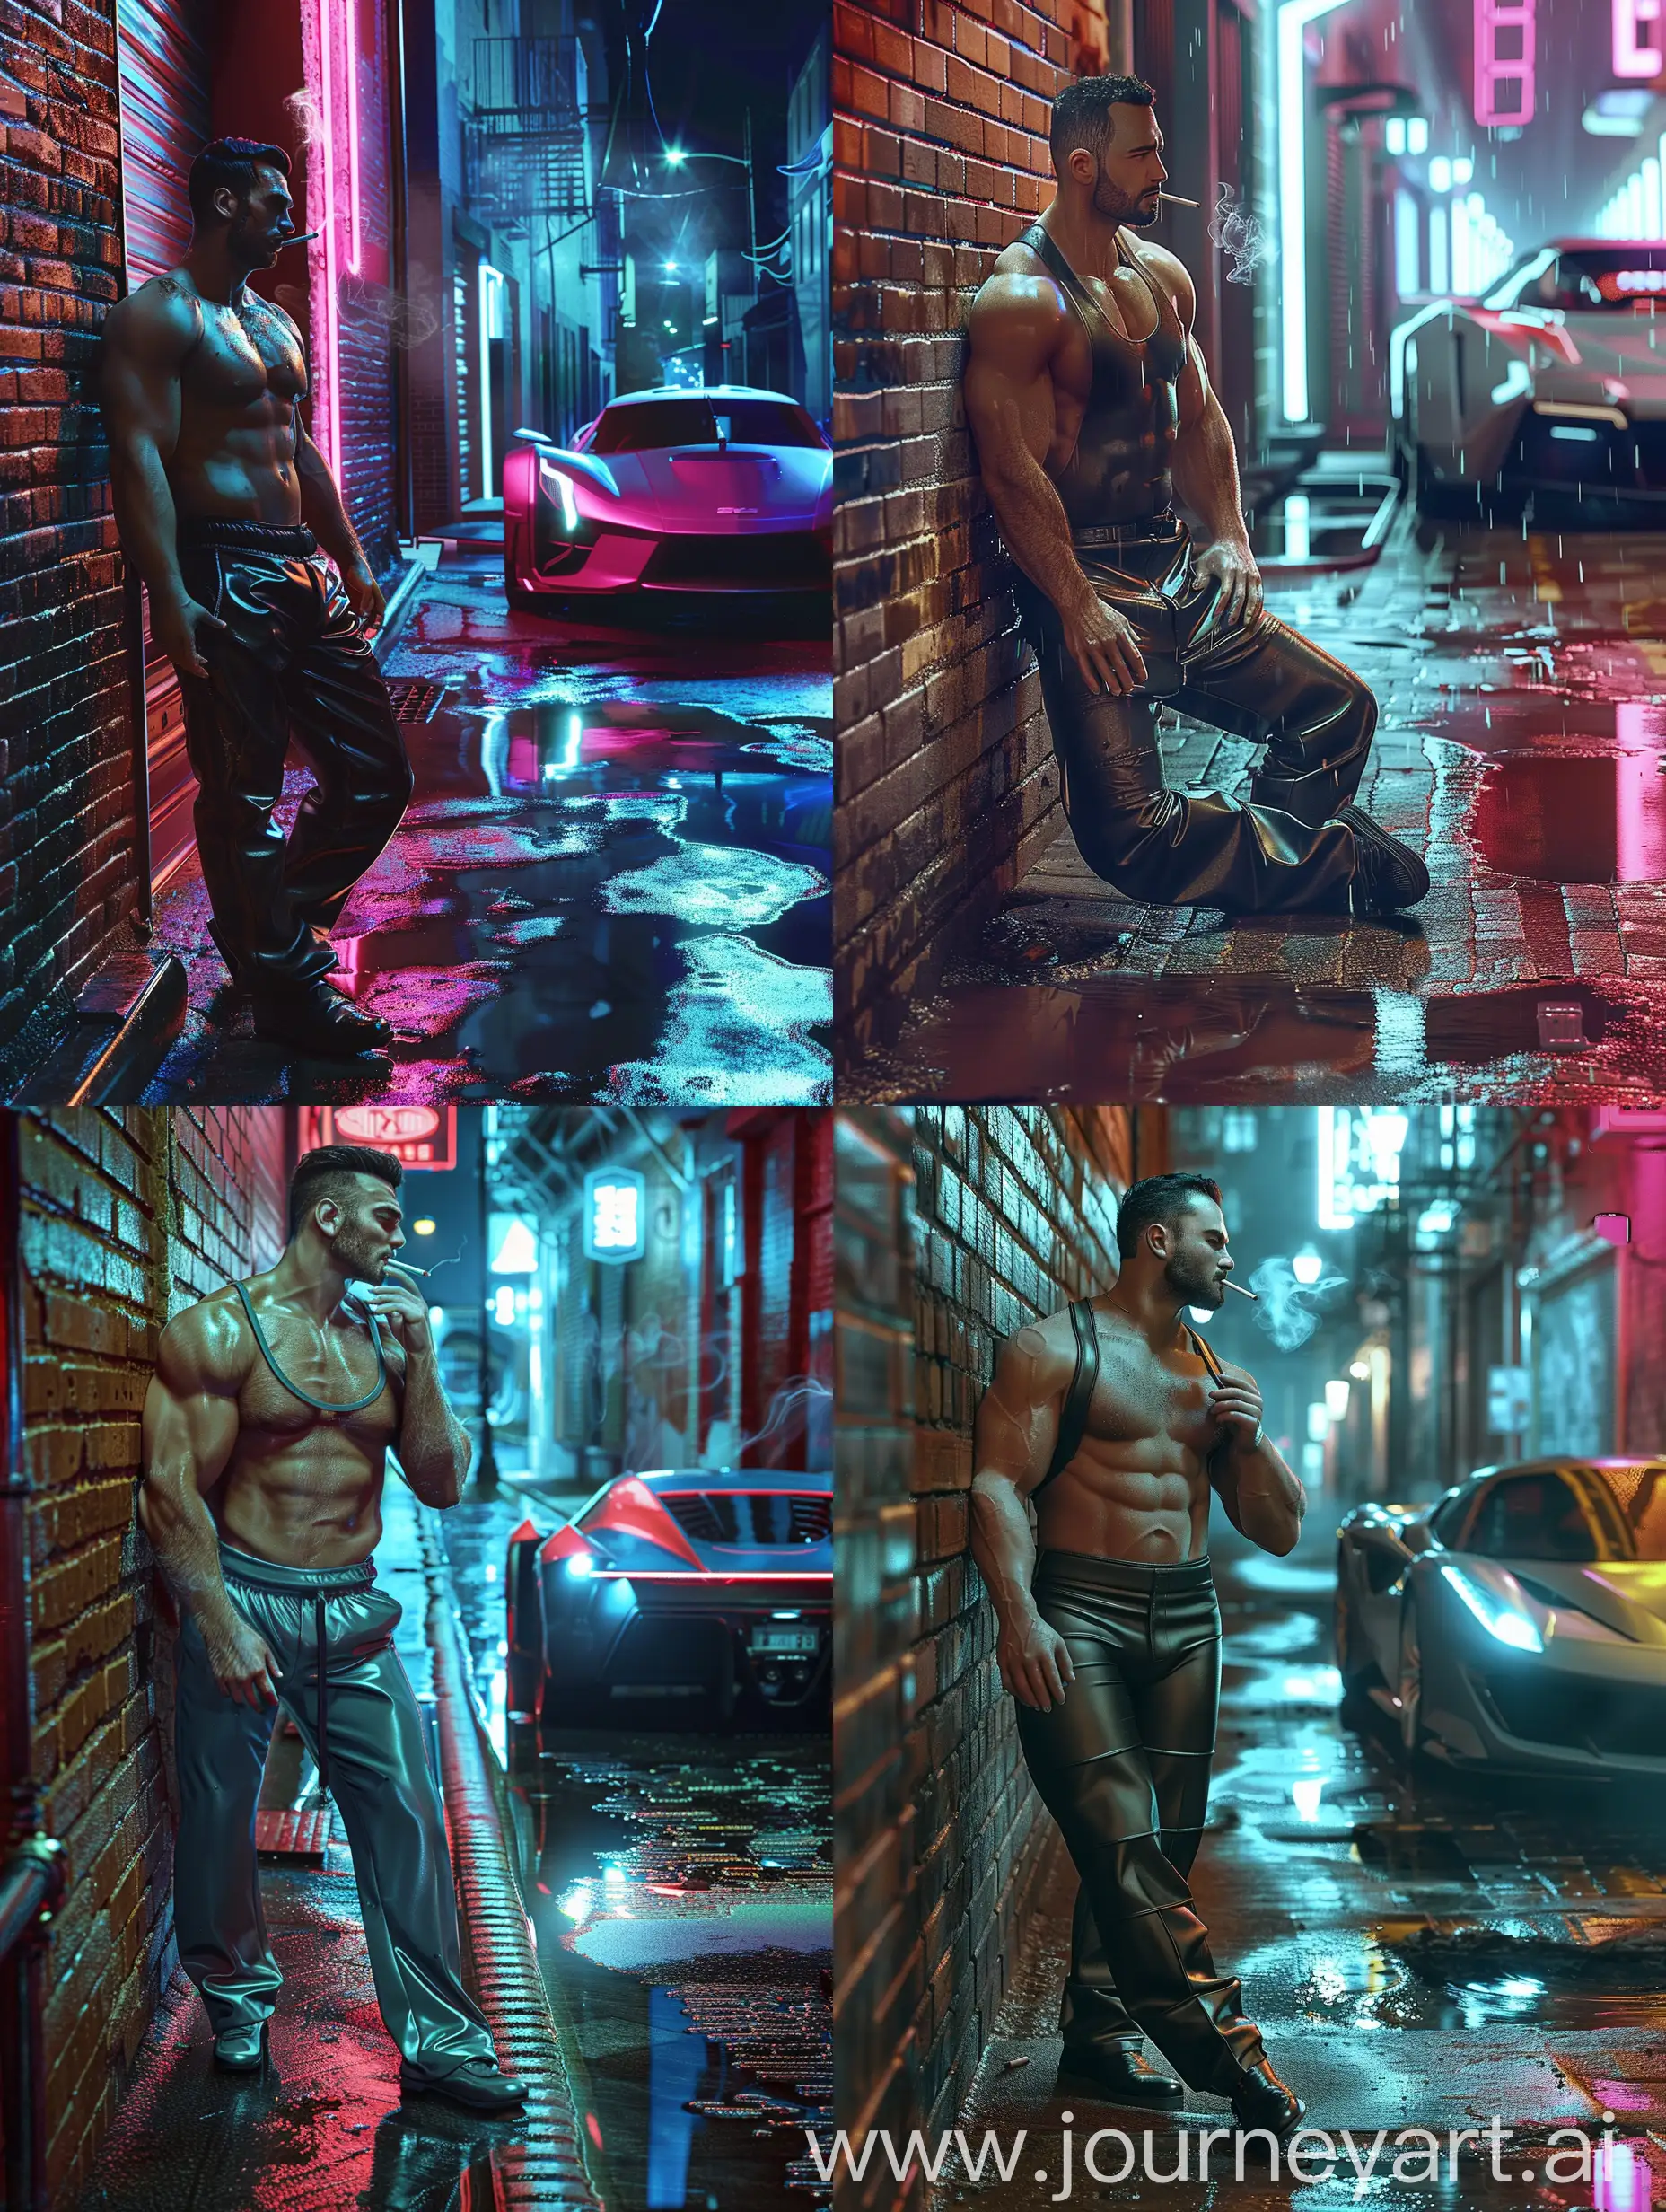 a muscular man in a rubber tank top and pants, smoking a cigarette, leaning against a brick wall, in an alley at night, in a neonwave city with wet cement and a futuristic sports car